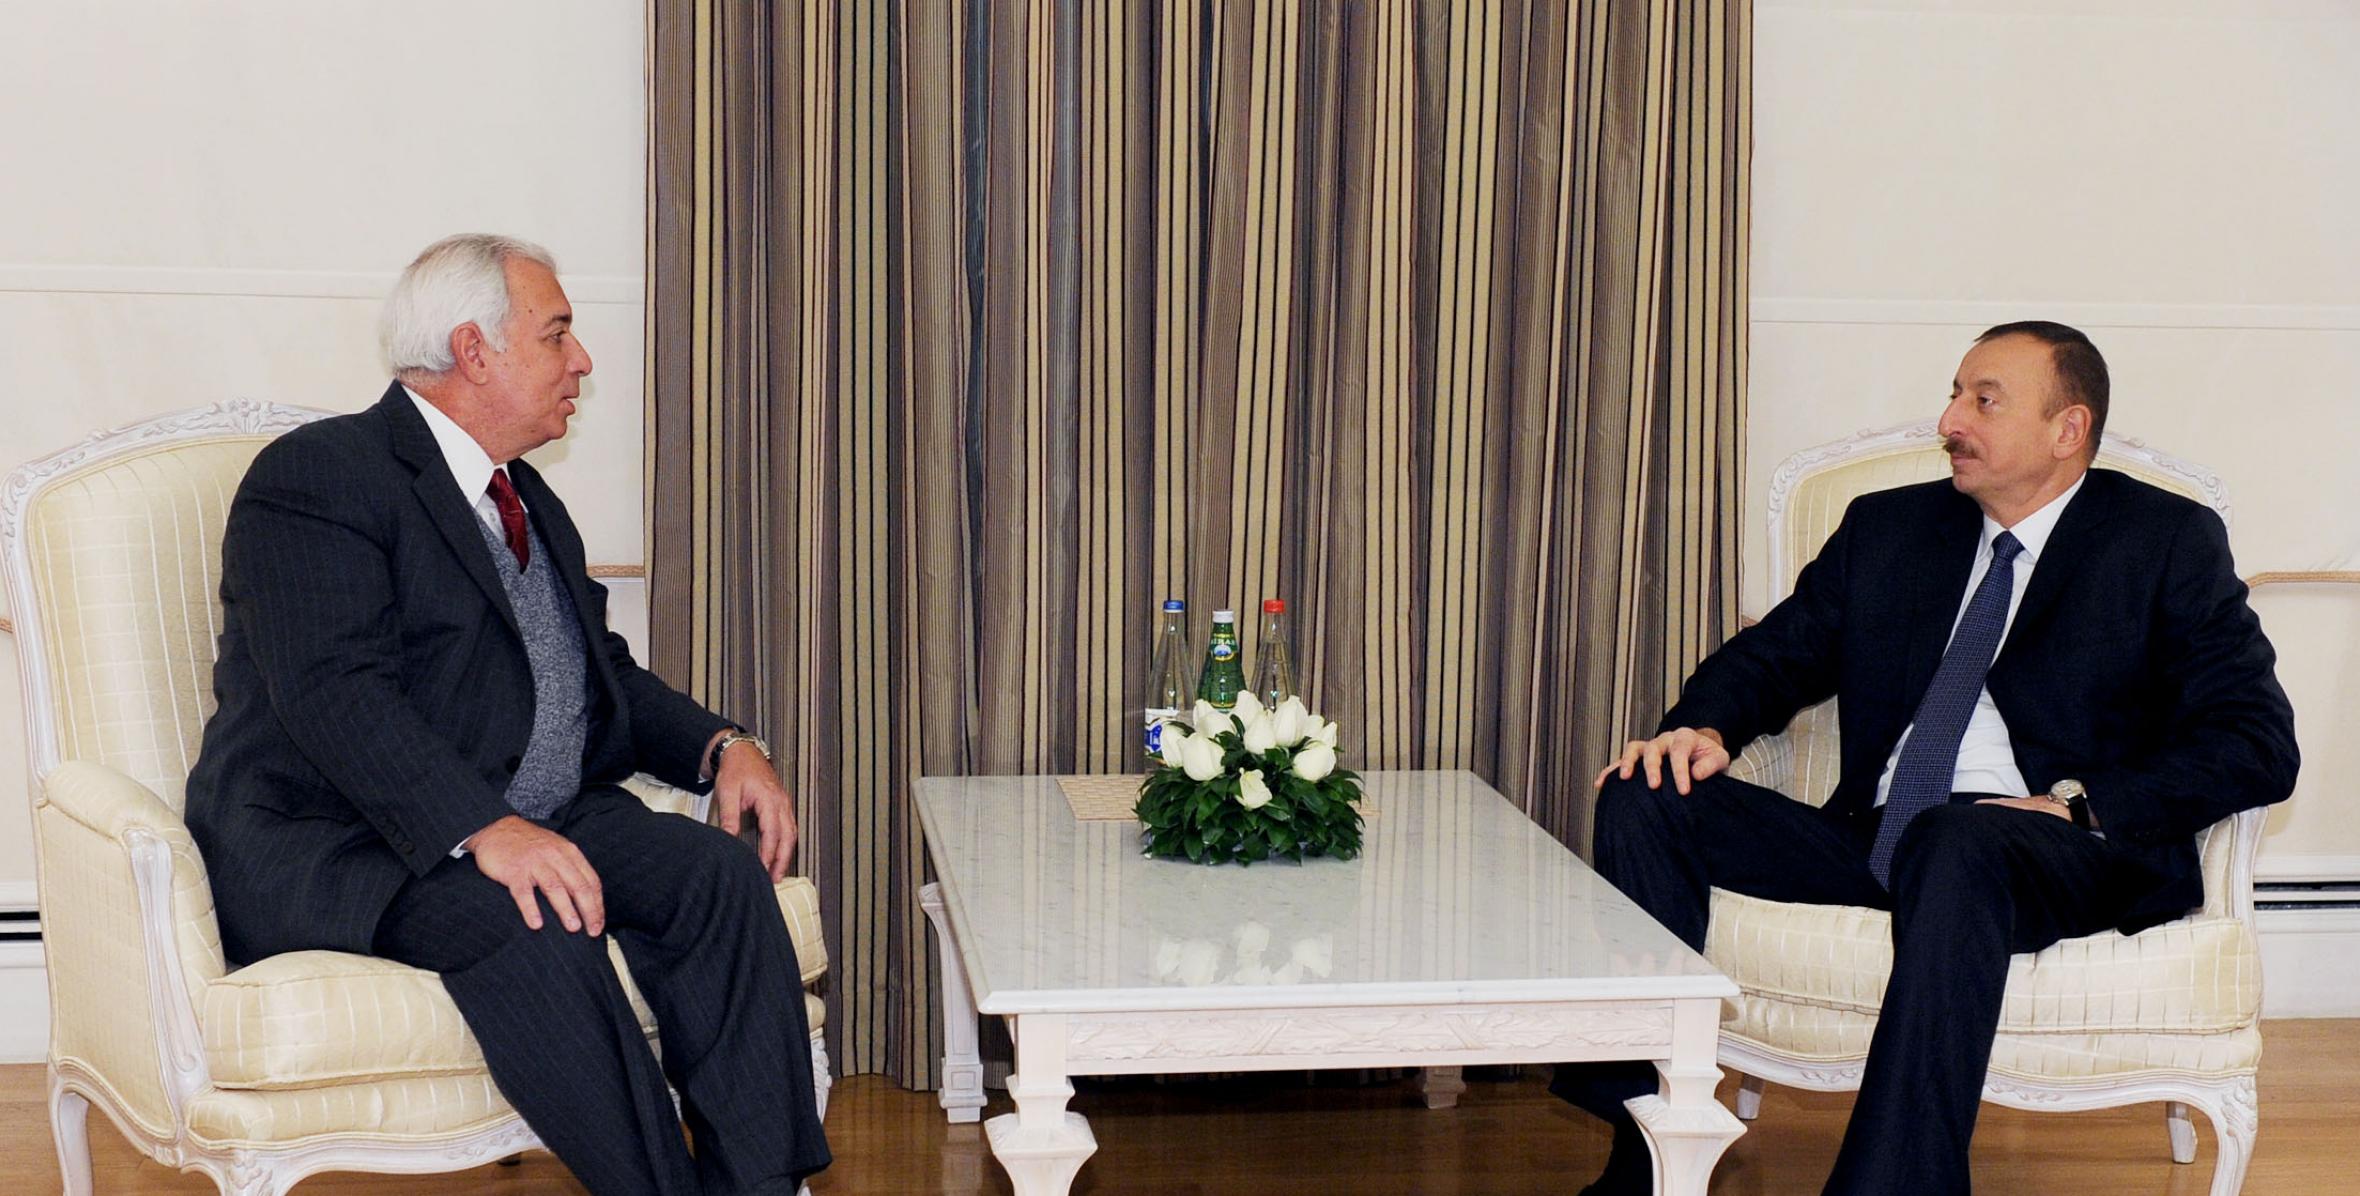 Ilham Aliyev received the Brazilian Ambassador to Azerbaijan at the end of his diplomatic mission